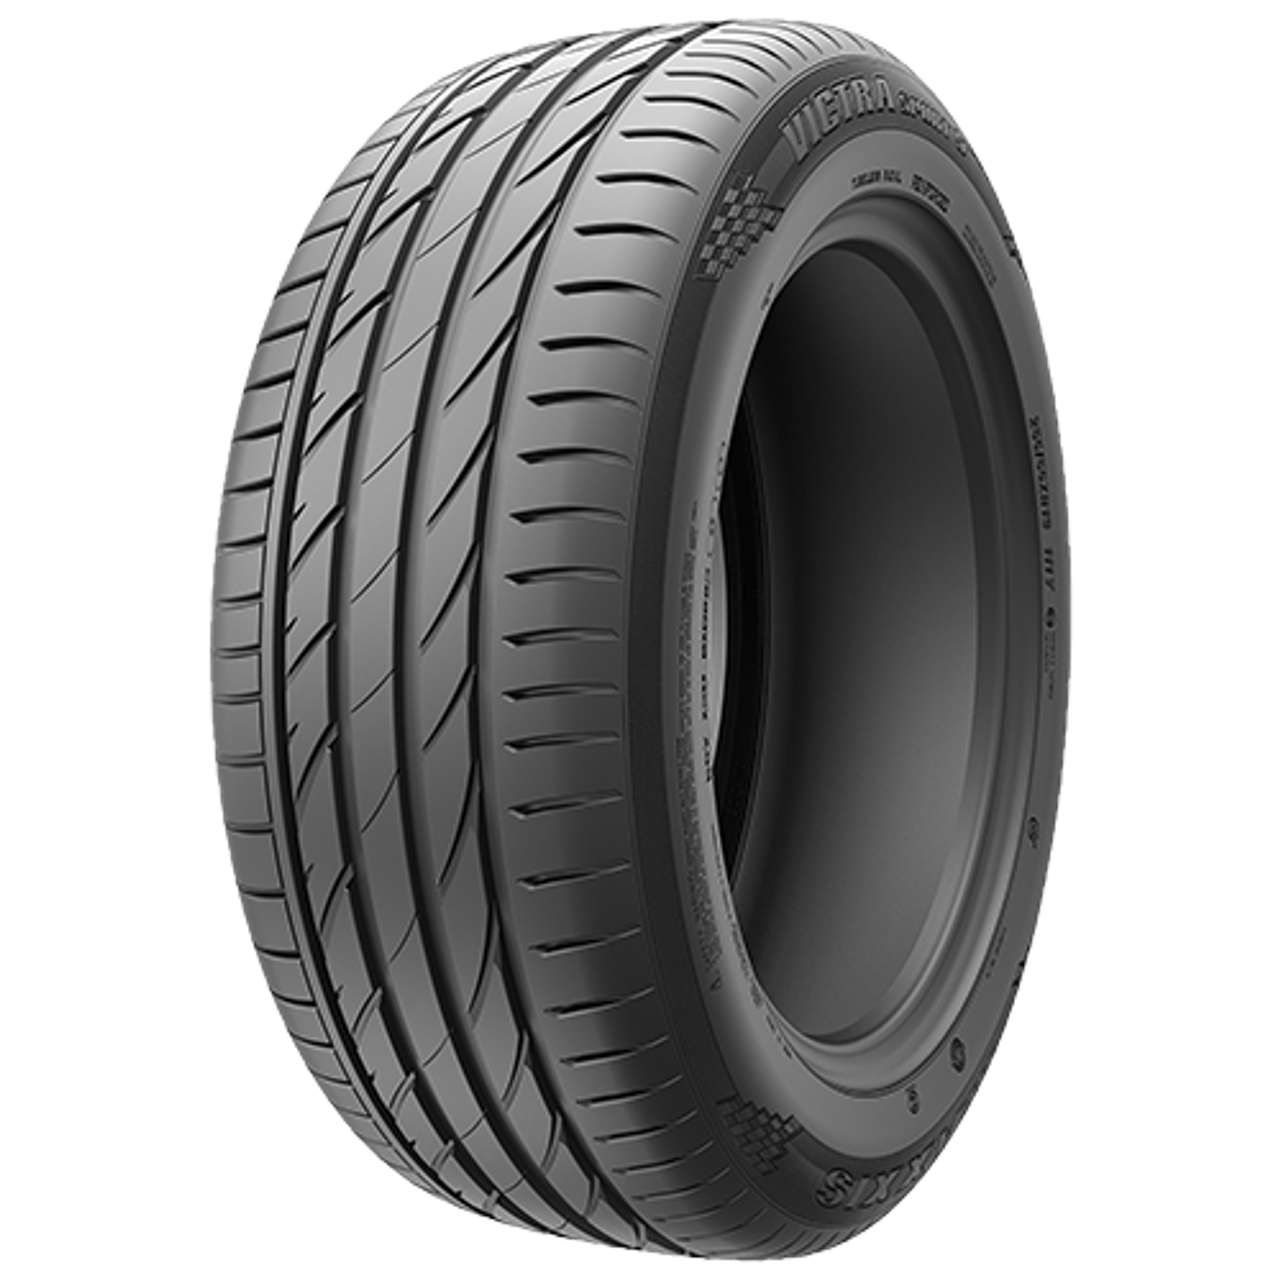 MAXXIS VICTRA SPORT 5 (VS5) 255/35ZR19 96Y MFS BSW